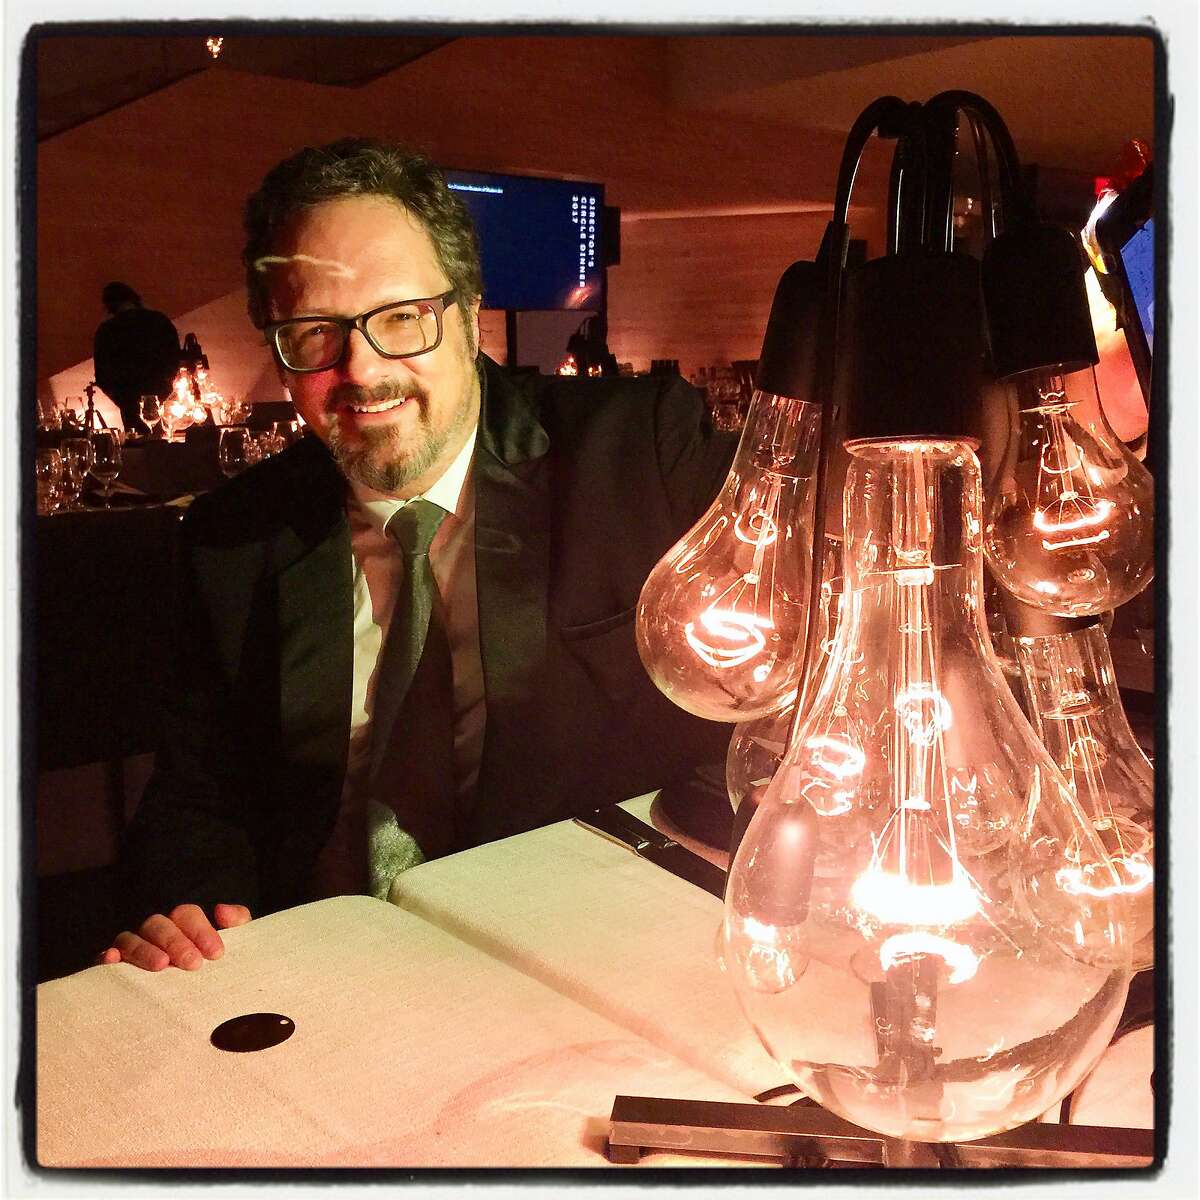 Artist Rafael Lozano-Hemmer and one of his centerpieces at SFMOMA Director's Circle Dinner. Feb. 8 2017.